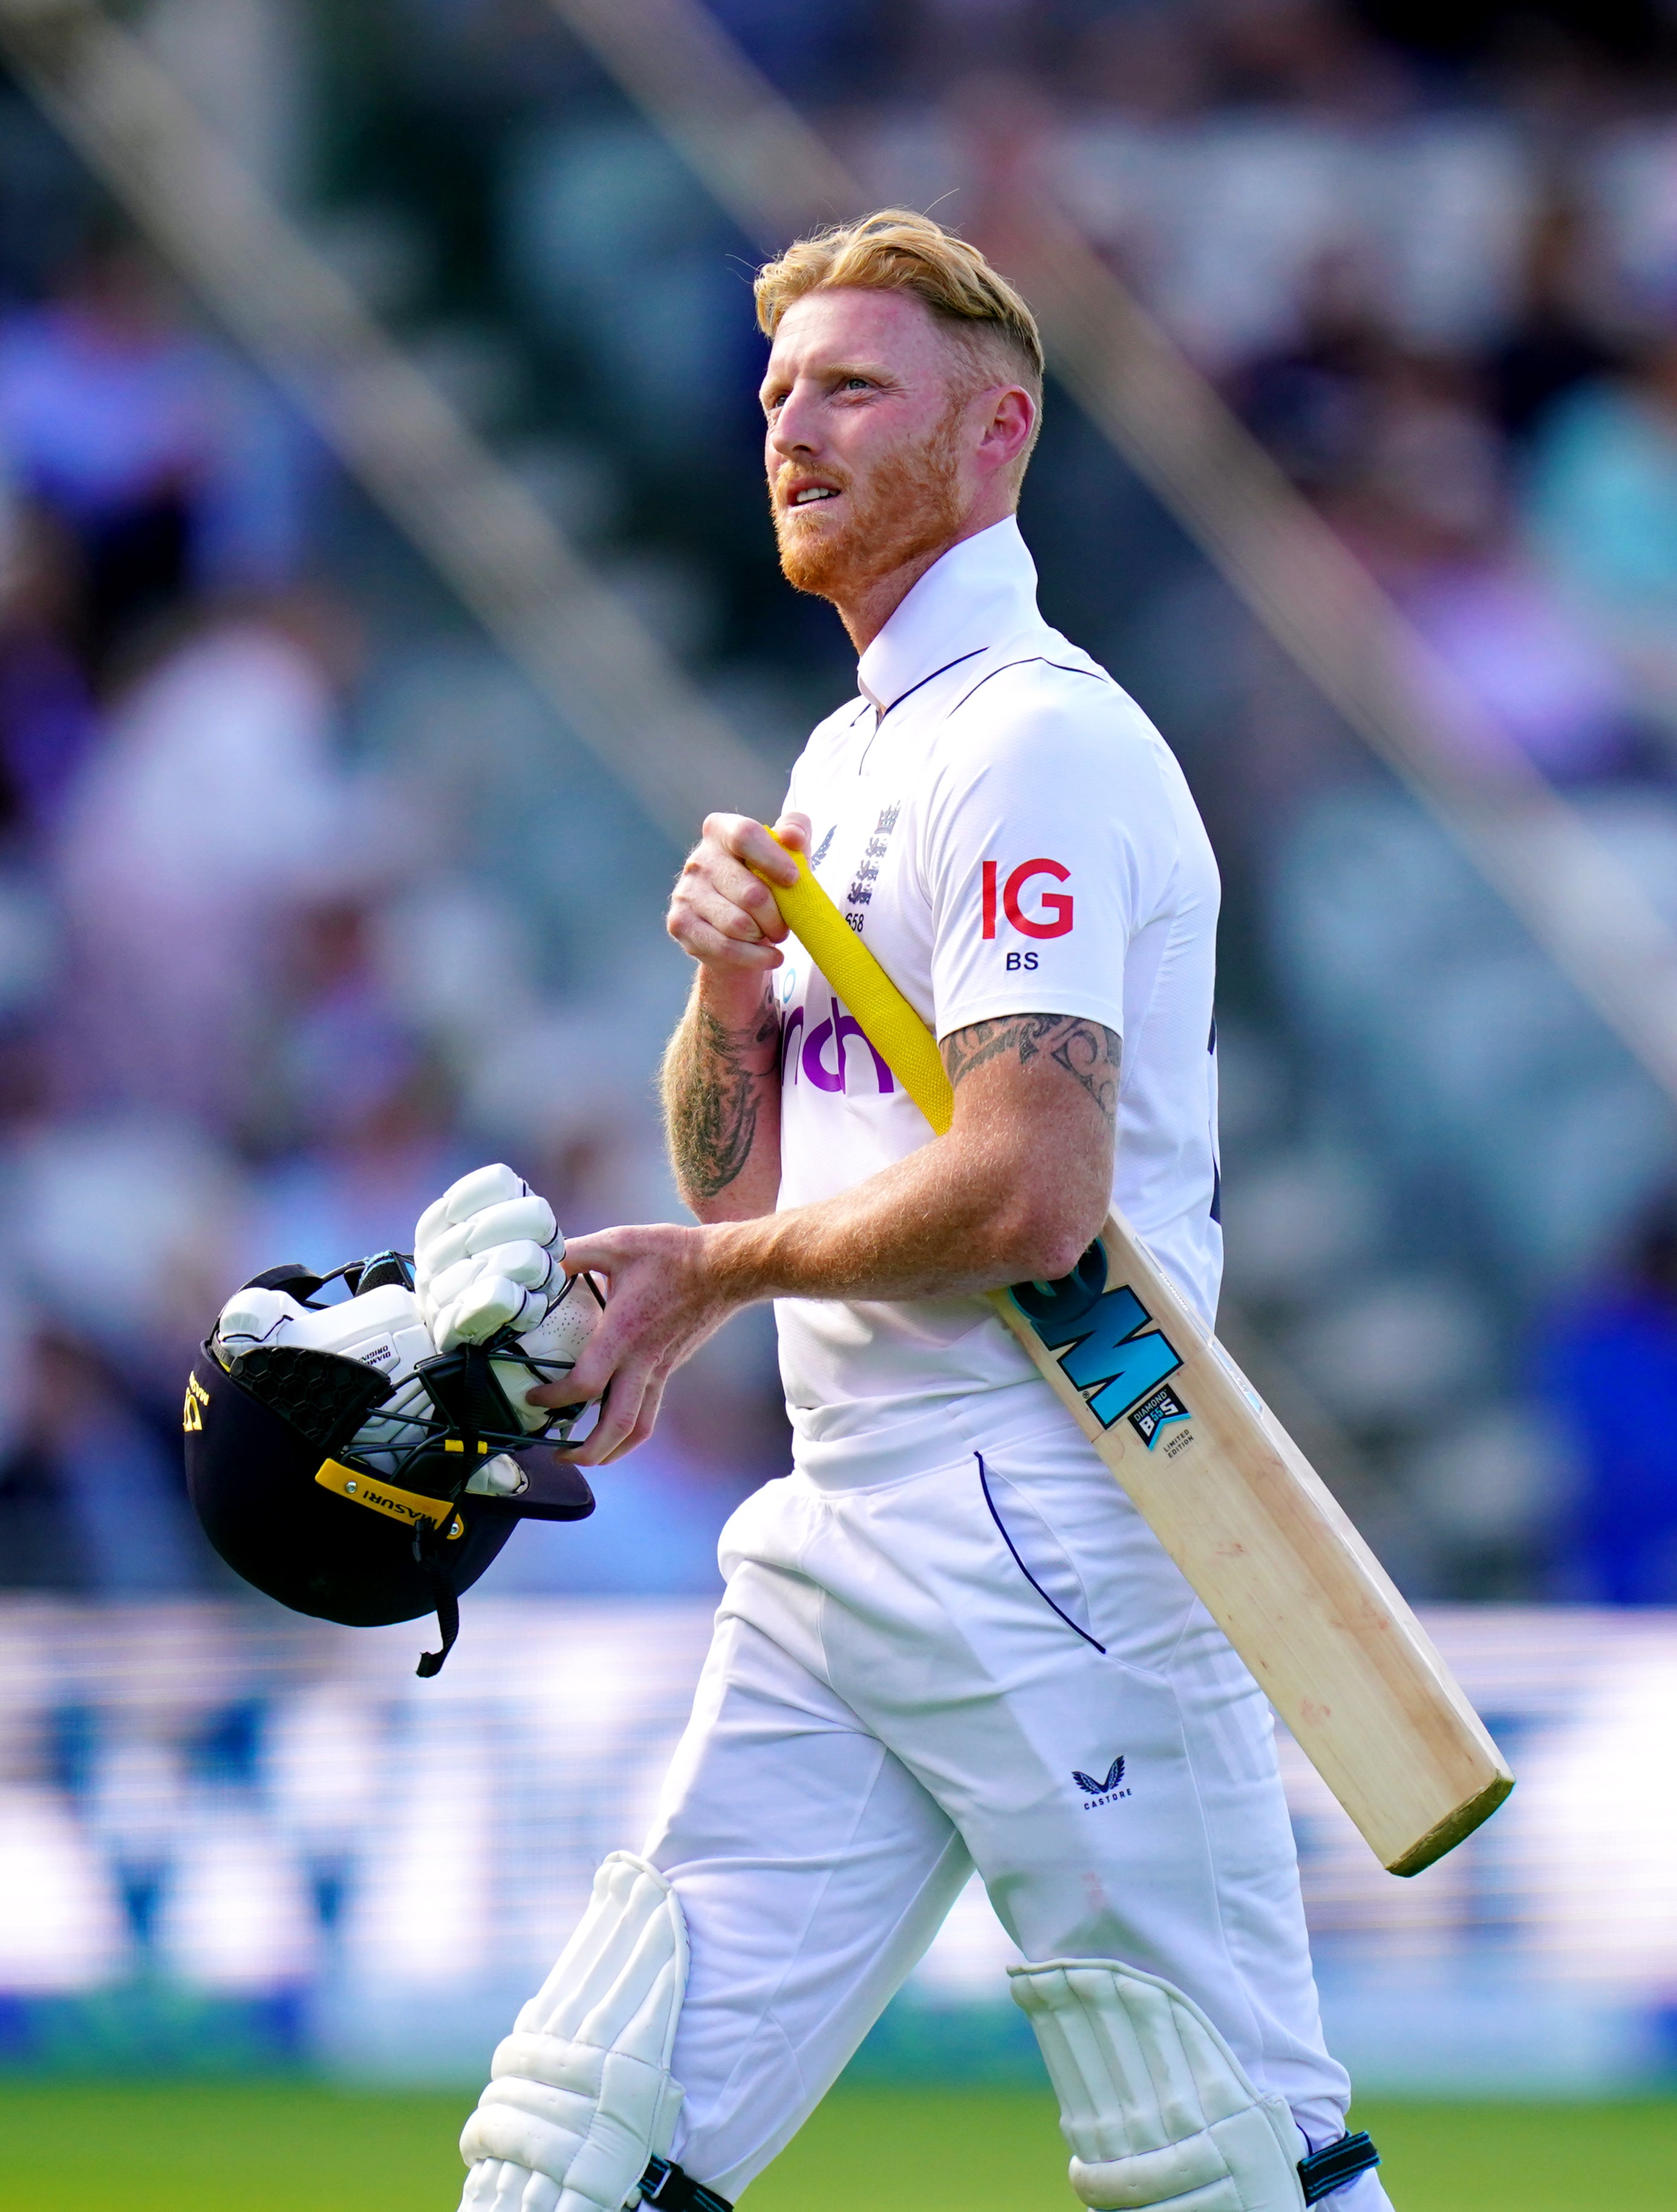 England opened their summer under new captain Ben Stokes in chaotic fashion, with 17 wickets falling on the first day of the Test against New Zealand at Lord’s (Adam Davy/PA)